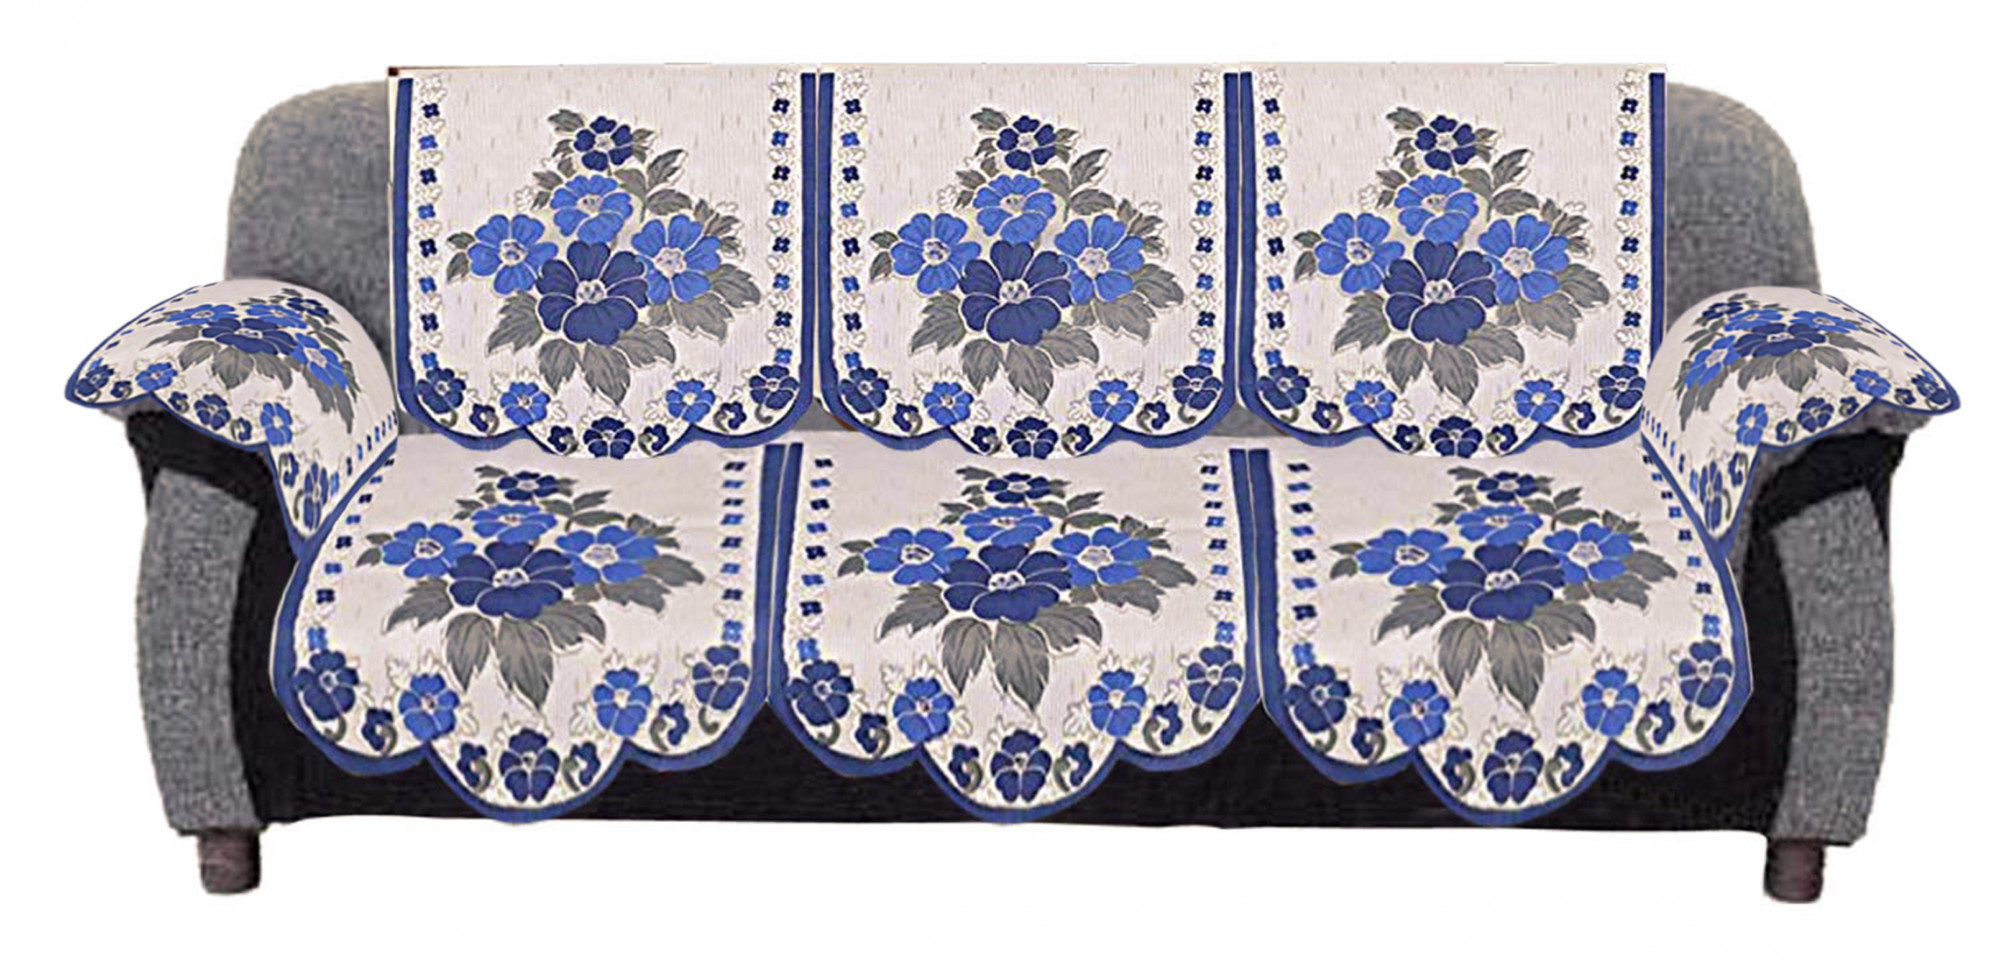 Kuber Industries Flower Design Cotton 5 Seater Sofa Cover With 6 Pieces Arms cover And 1 Center Table Cover Use Both Side, Living Room, Drawing Room, Bedroom, Guest Room (Set Of17, Cream & Blue)-KUBMRT12031